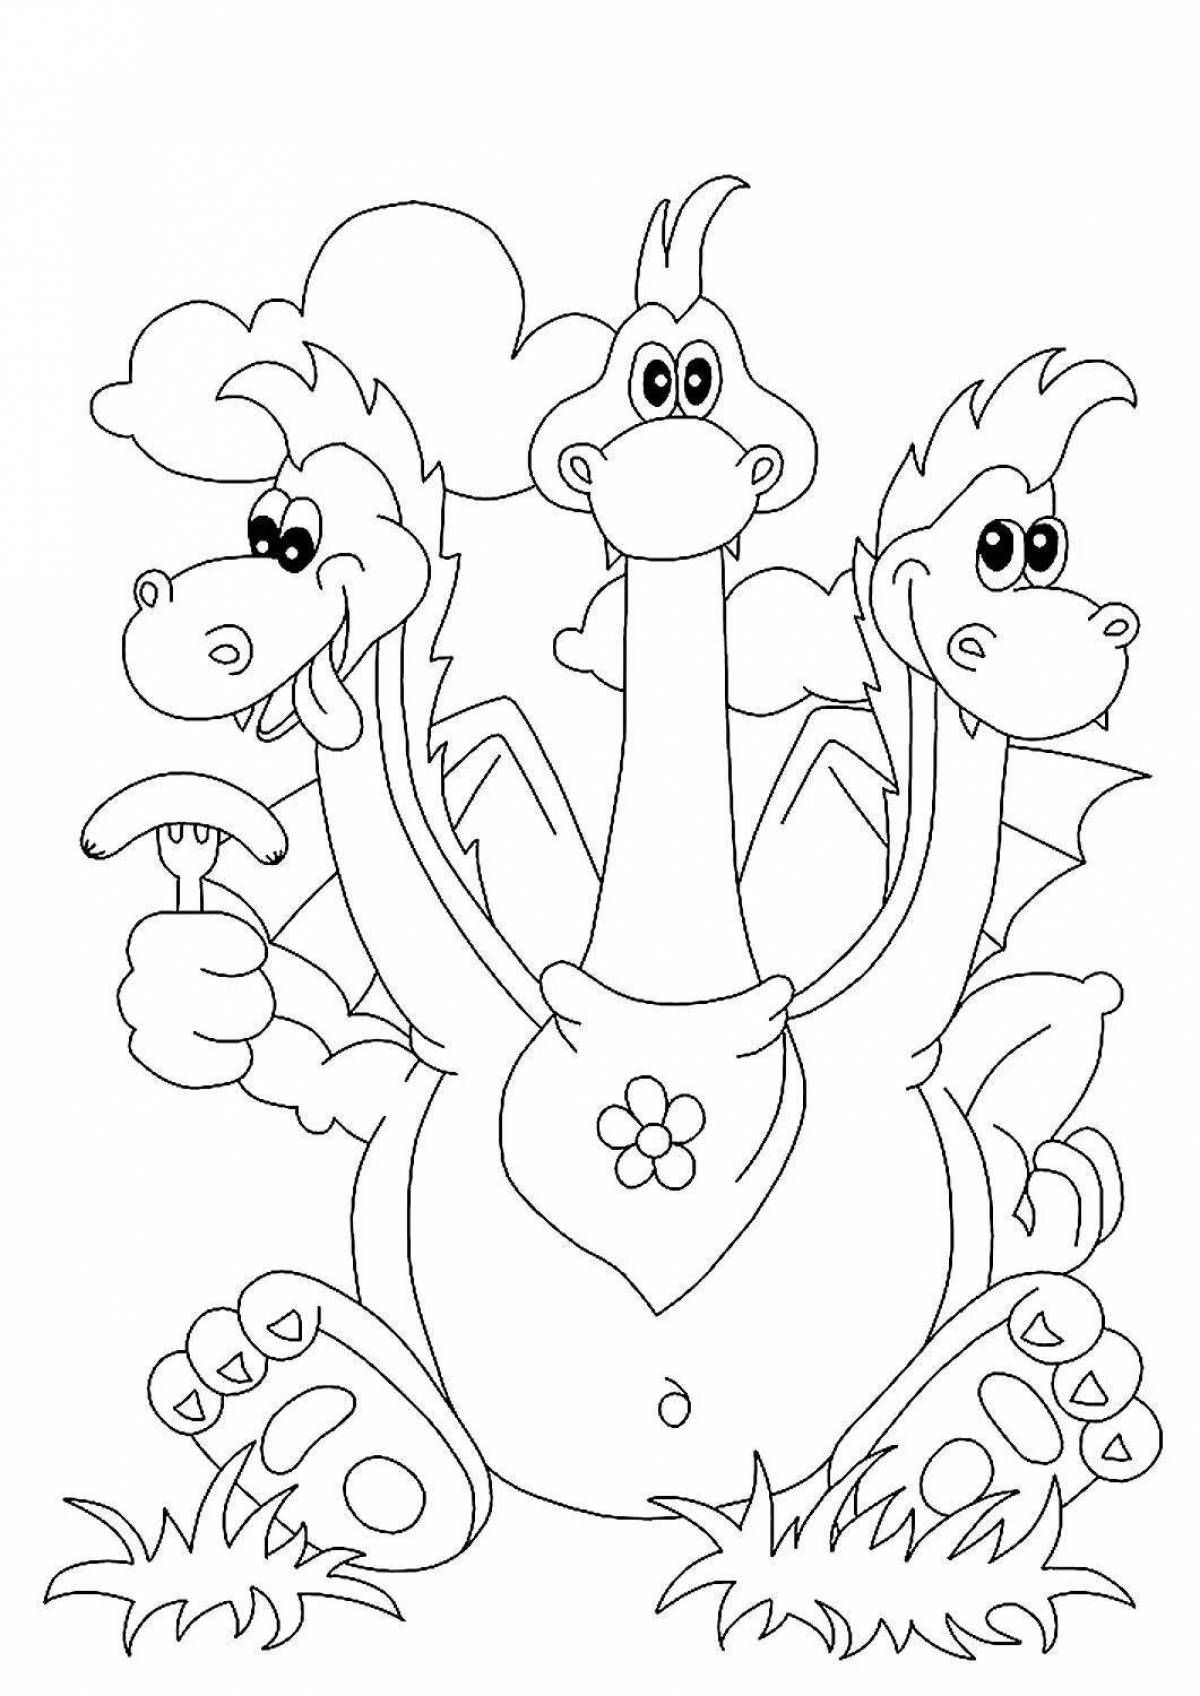 Glorious three-headed dragon coloring page